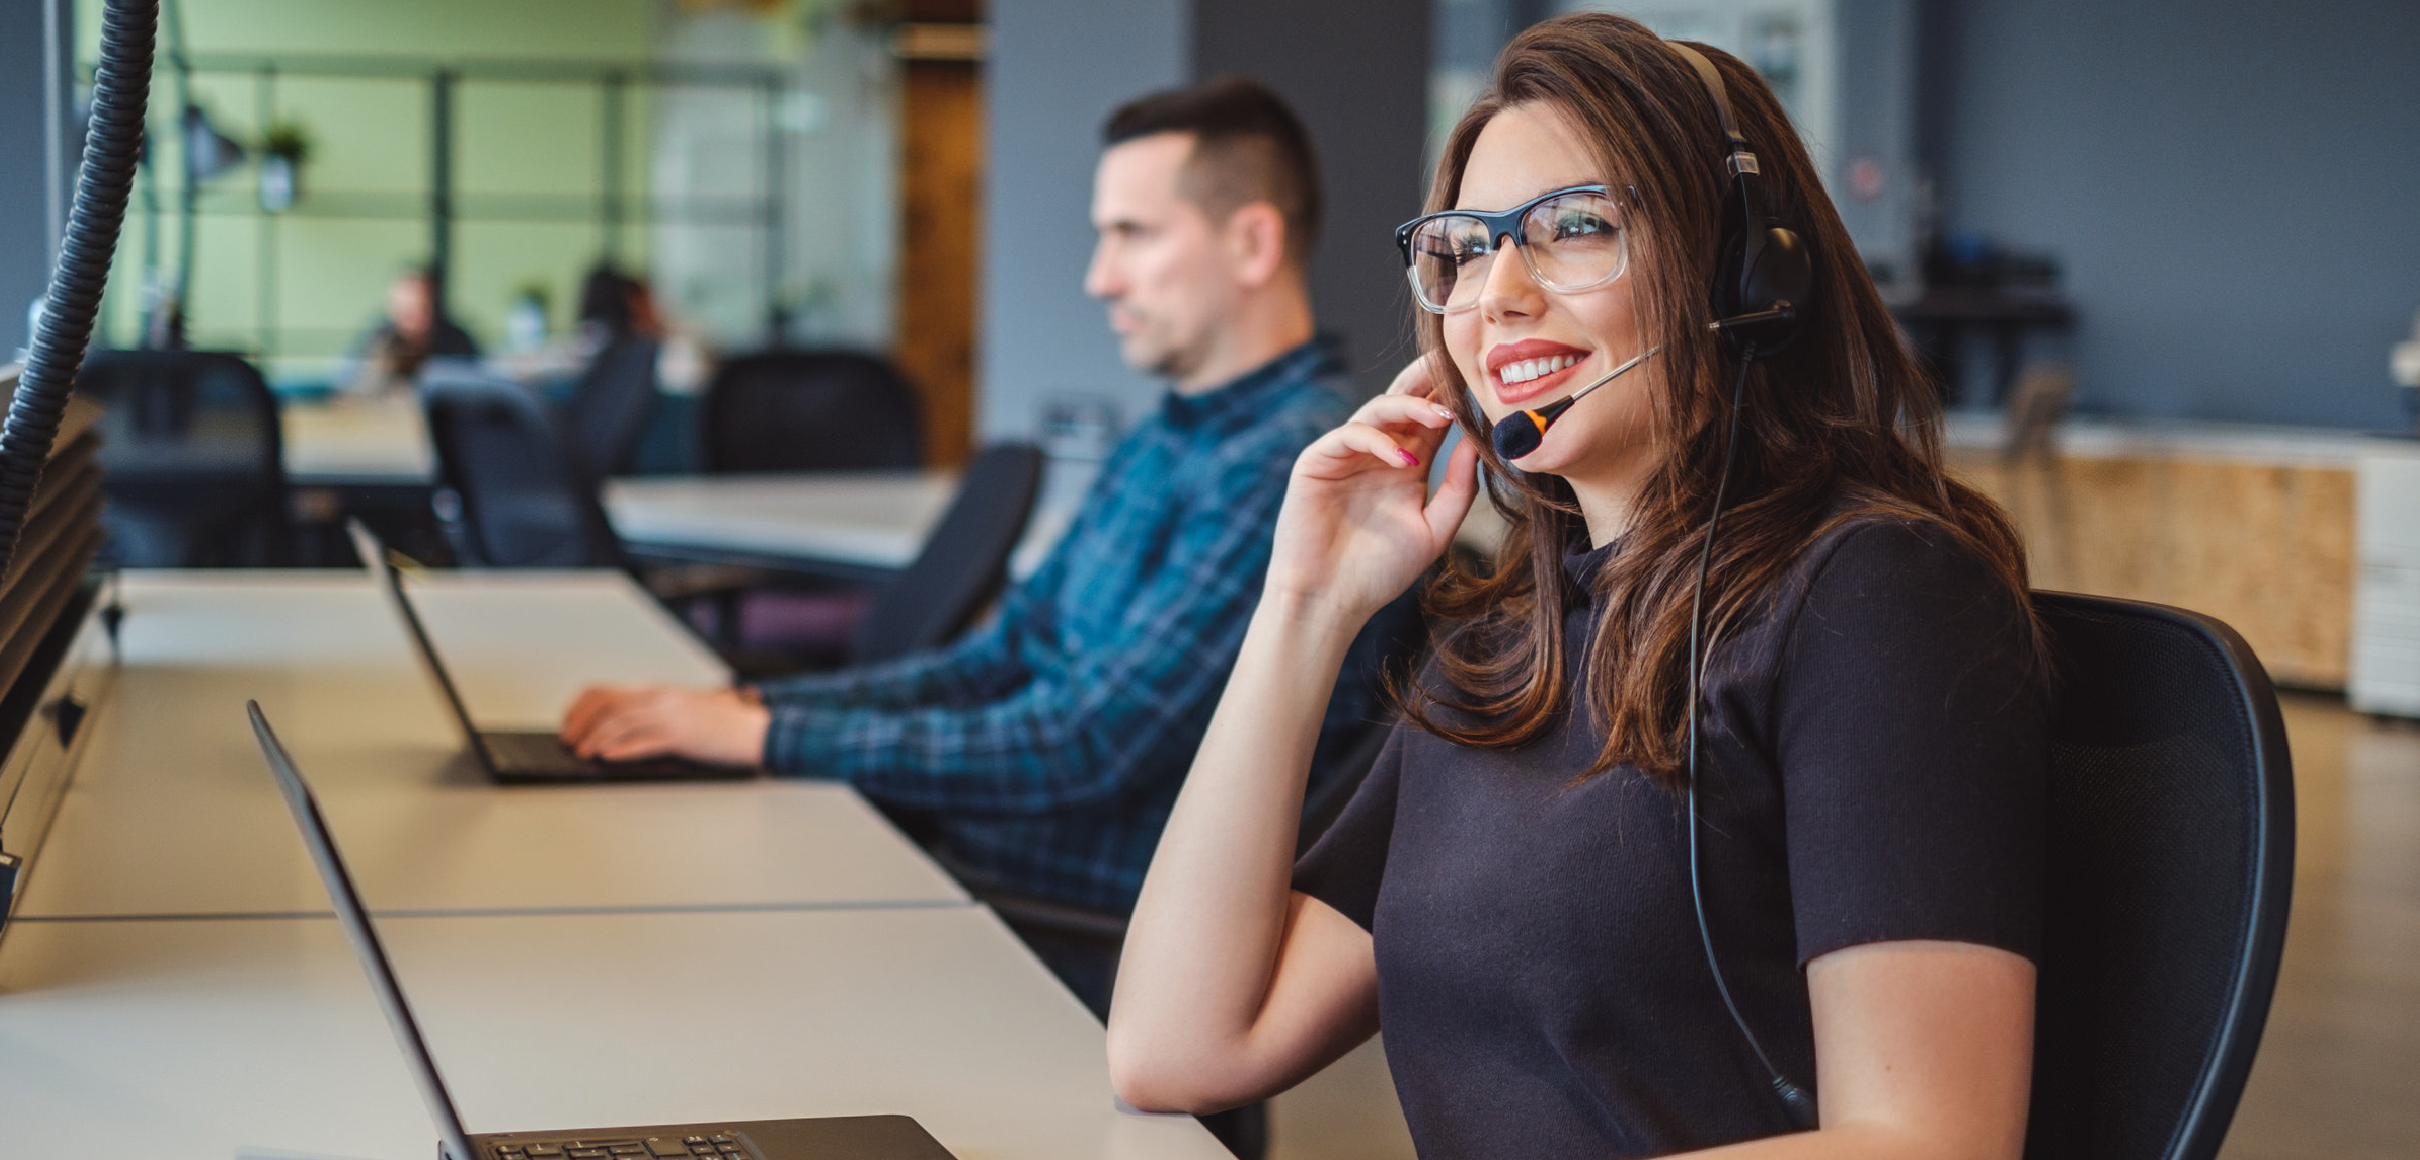 Track These 20 Call Center Metrics to Measure Performance Use AI technology to turn web leads into live calls for your sales team.